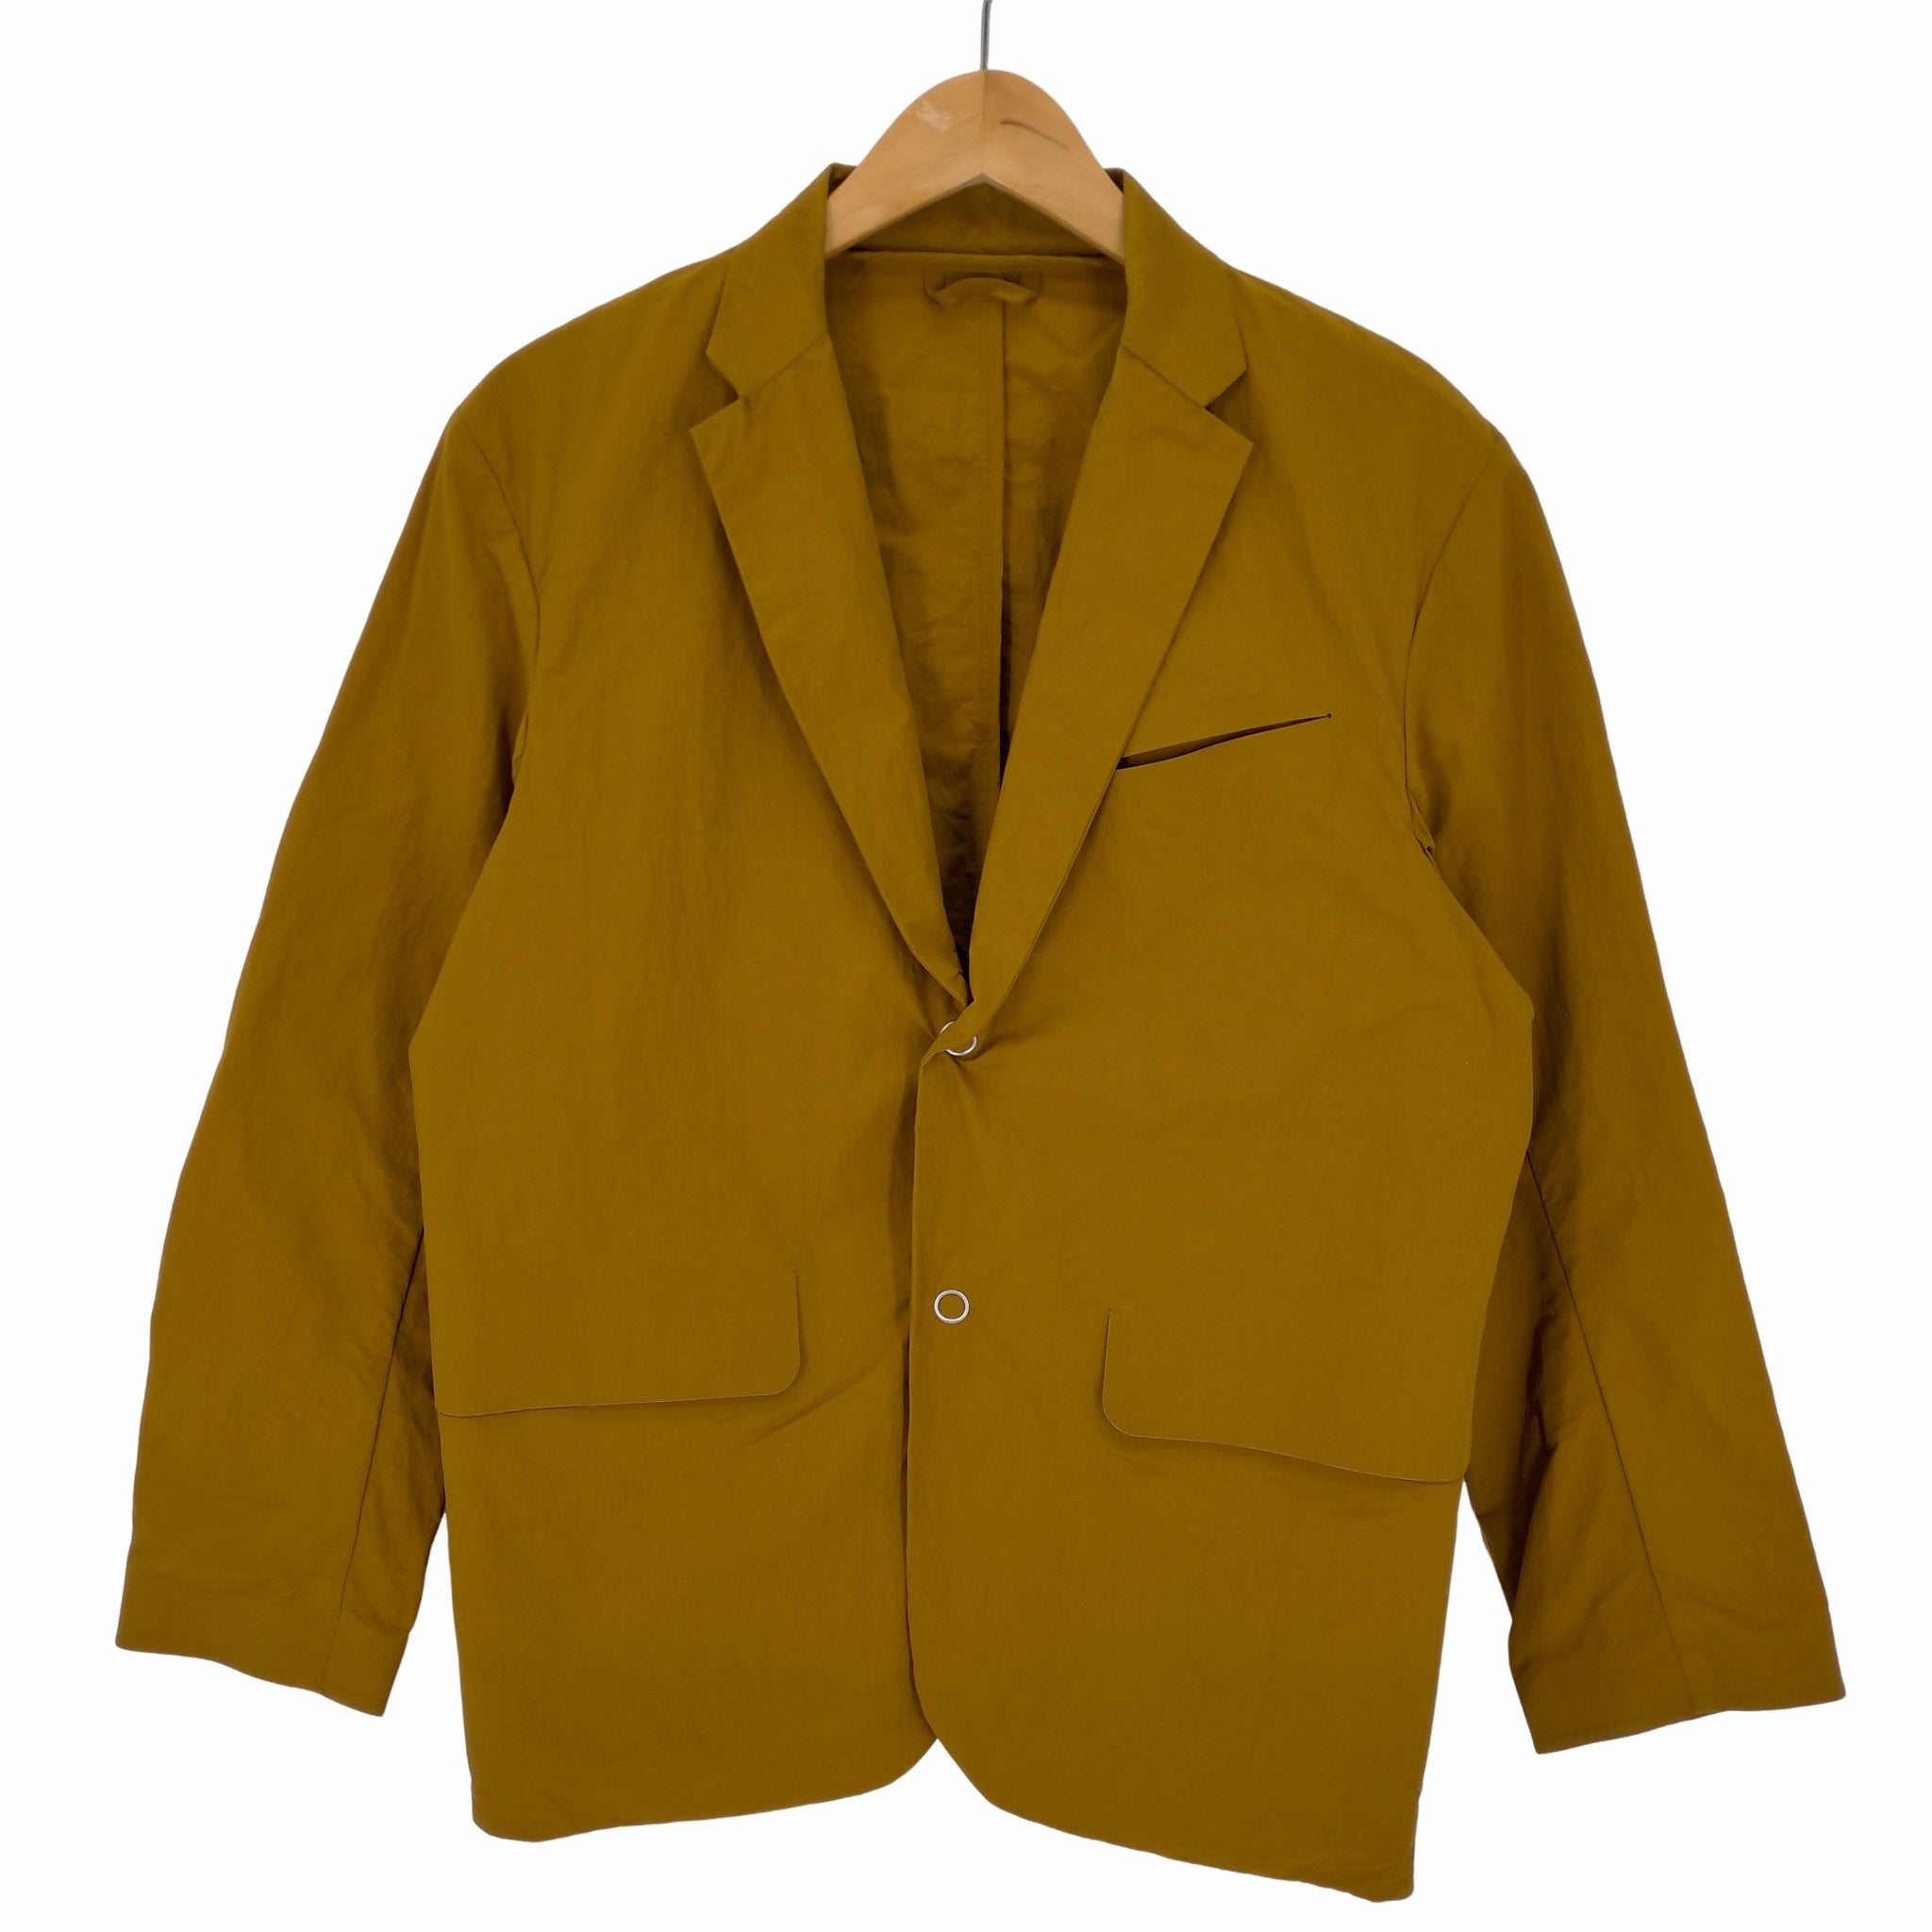 DESCENTE PAUSE(デサントポーズ) TAILORED JACKET-